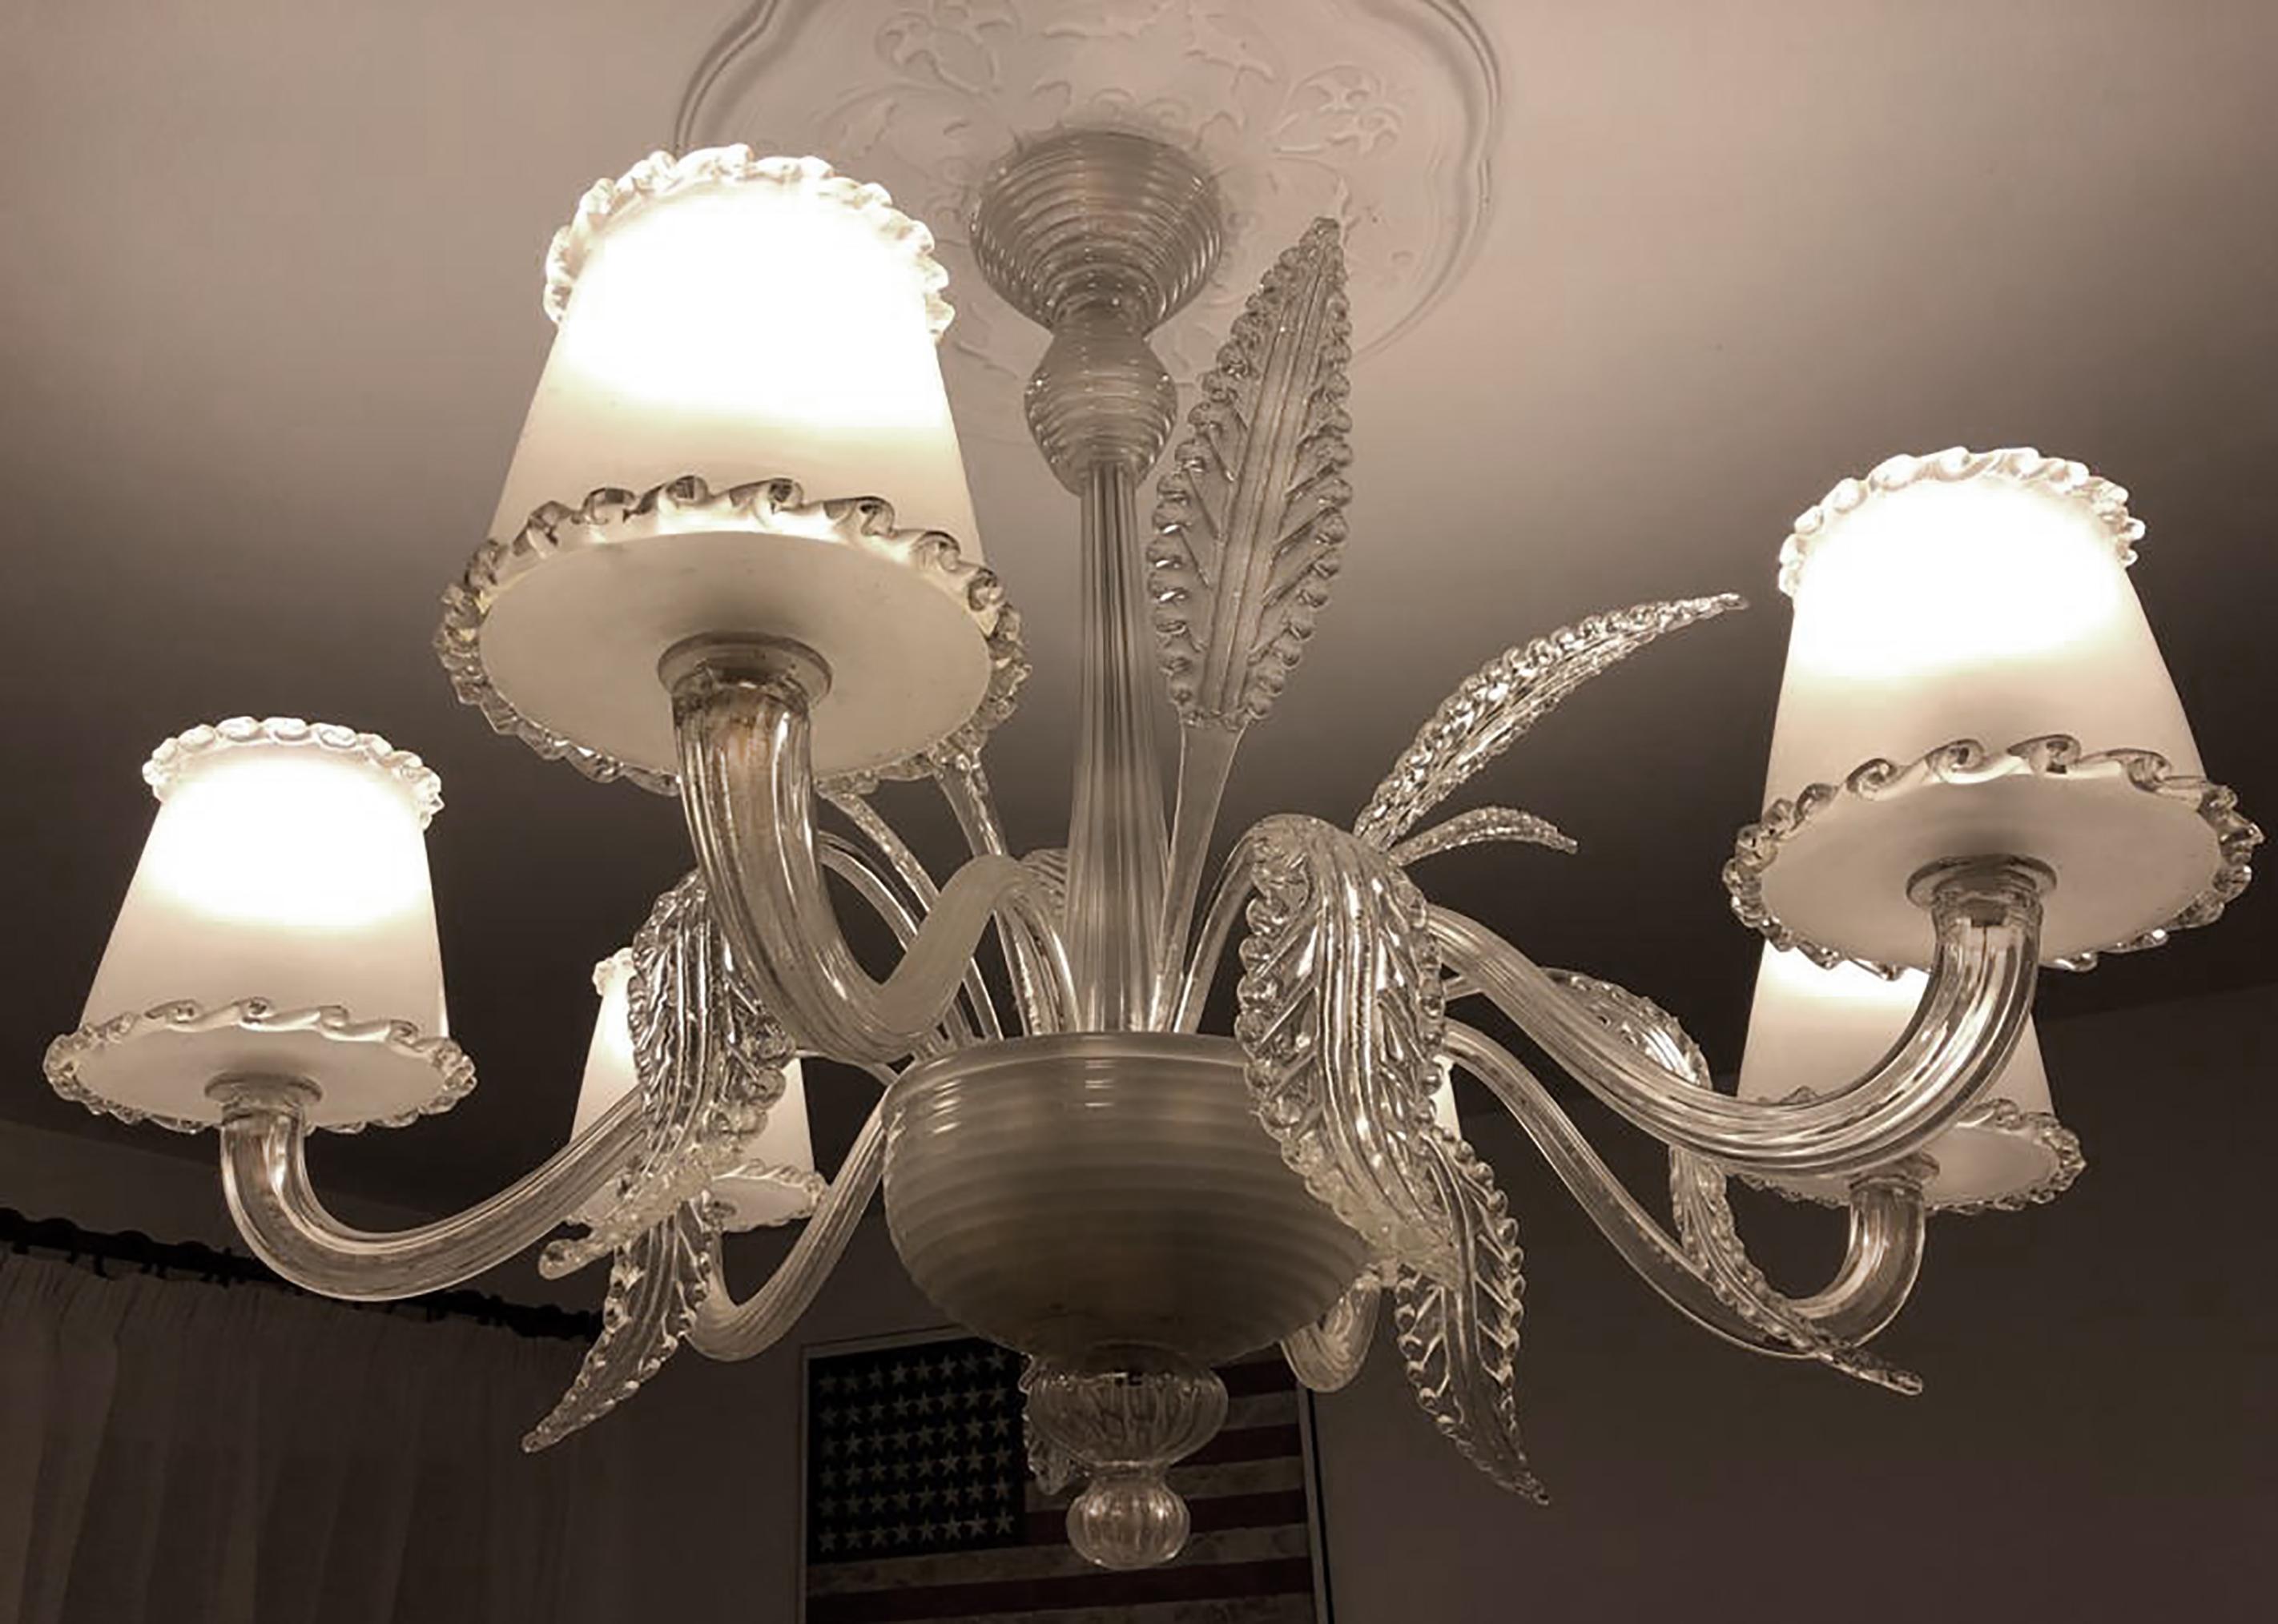 Mid-20th Century Italian Chandelier by Barovier & Toso, Murano, 1940s For Sale 6